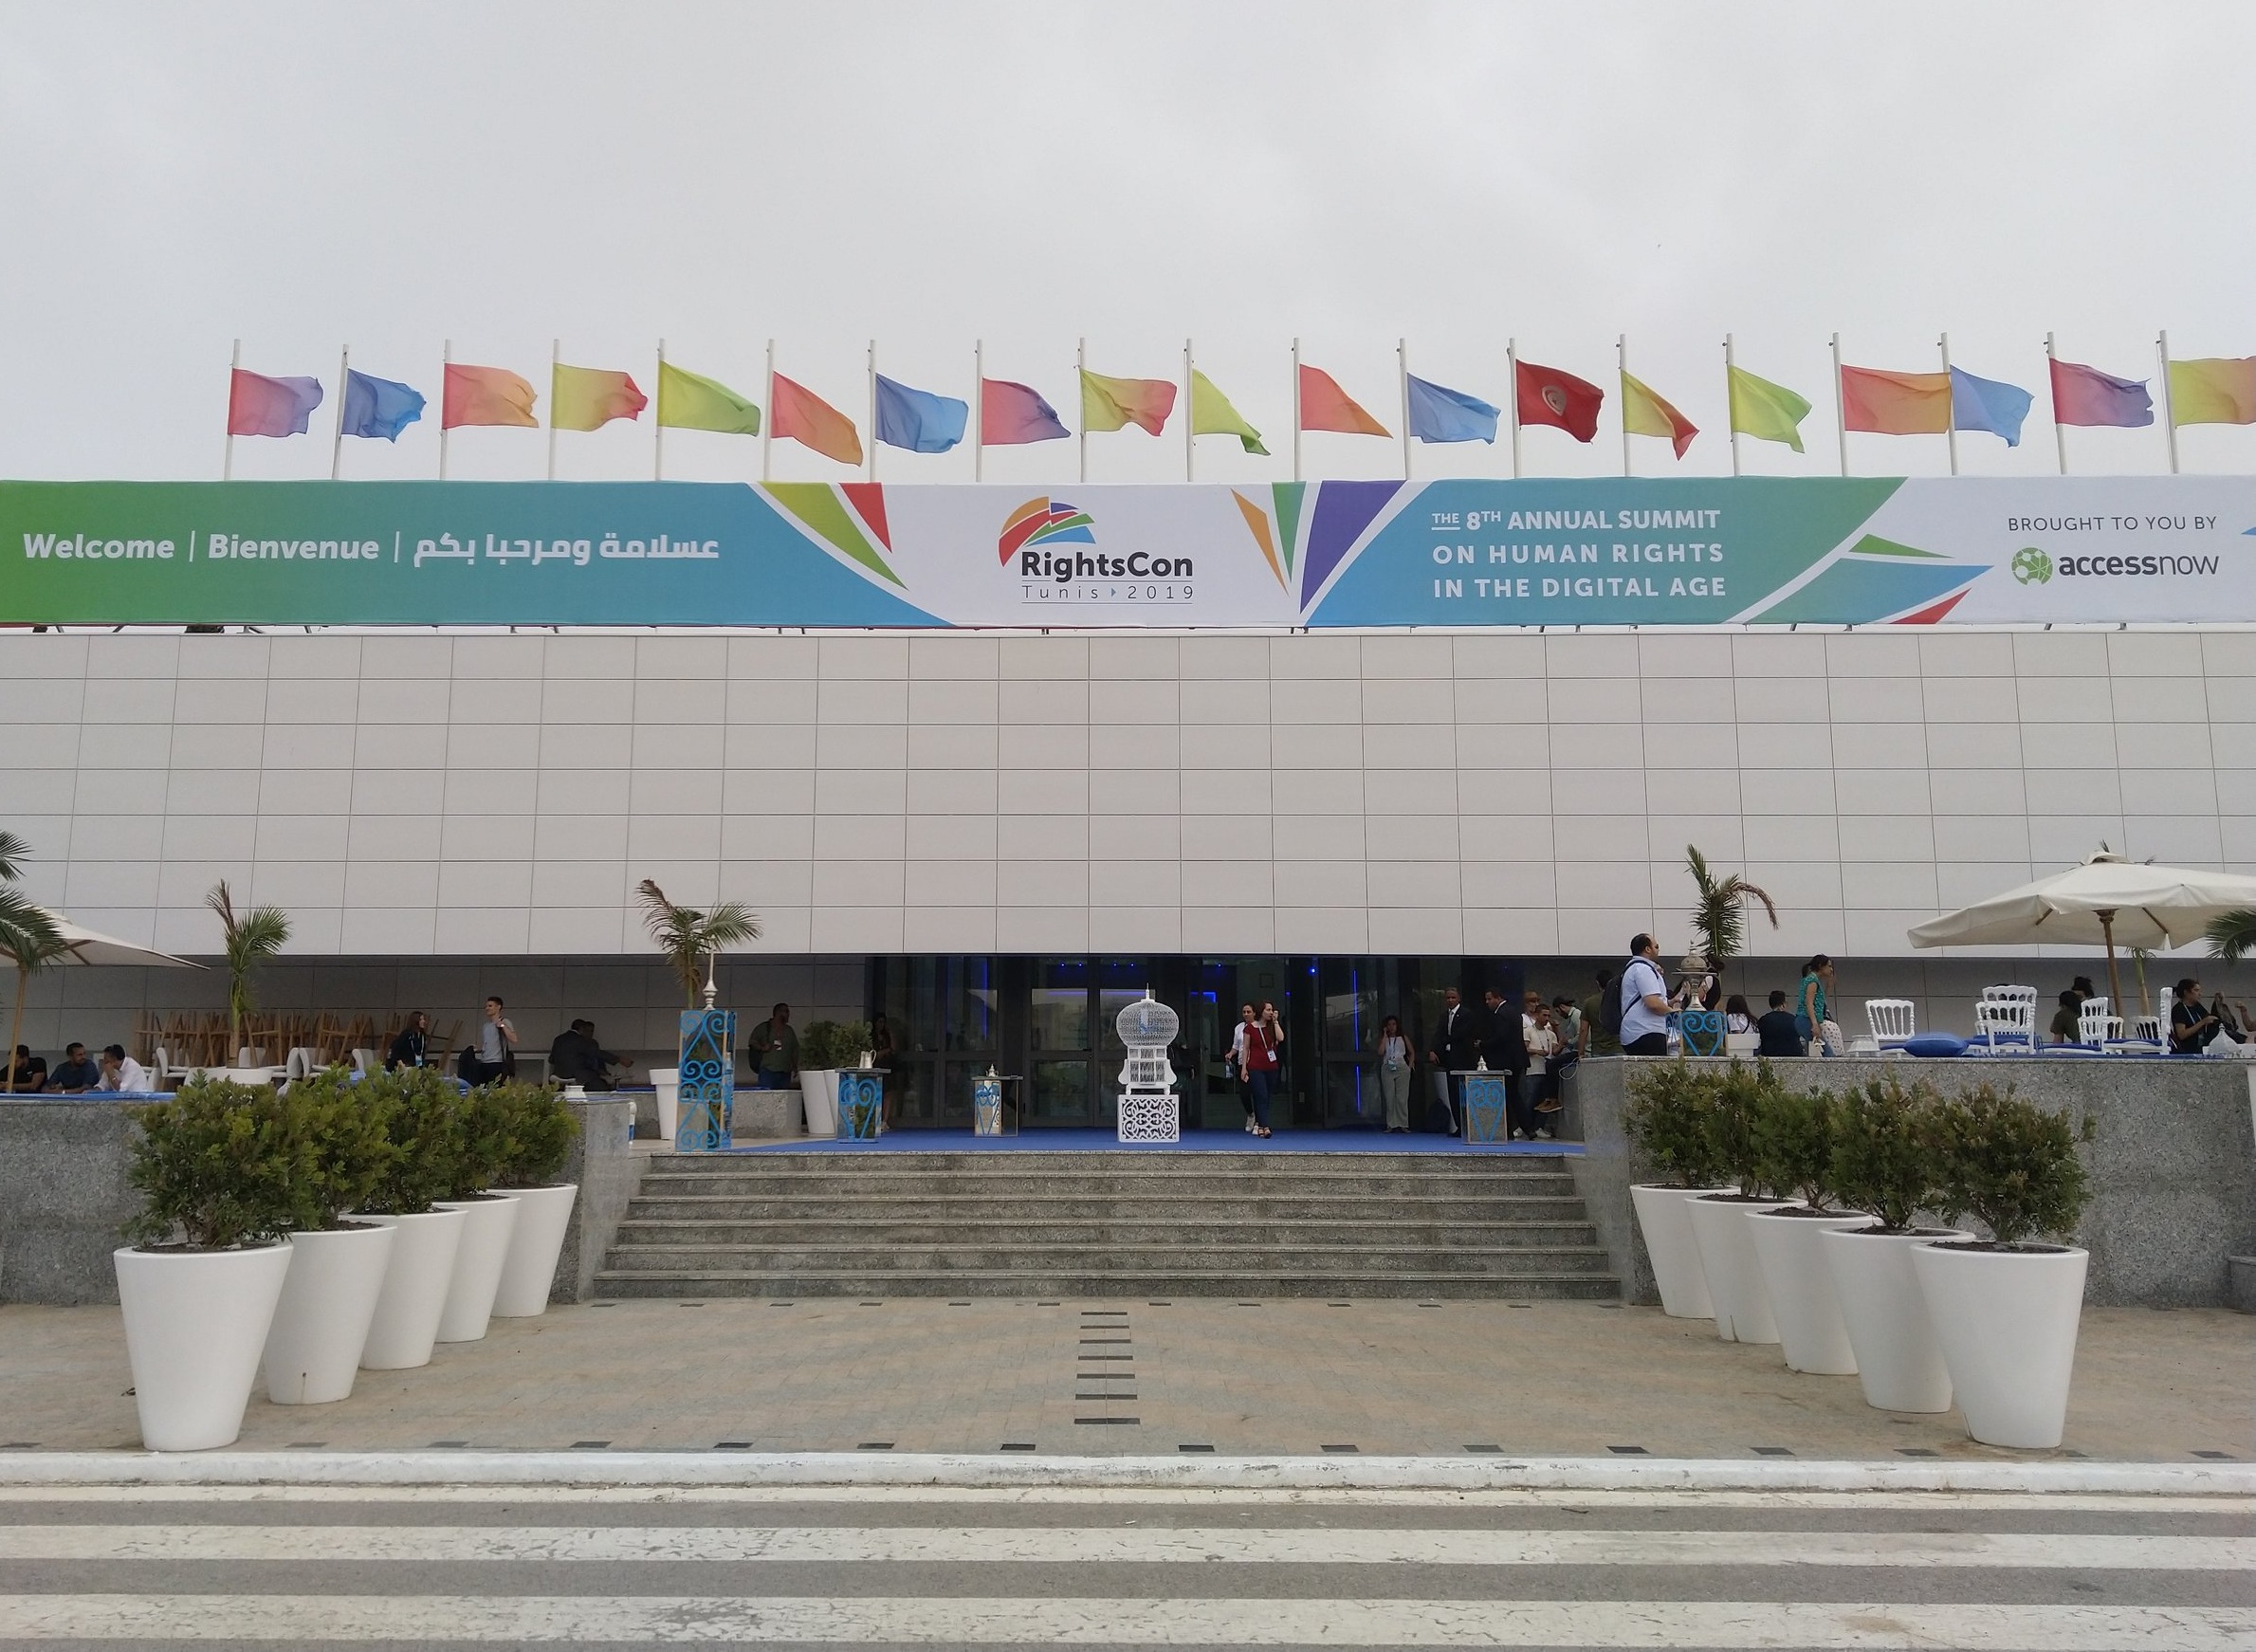 Picture showing the main entrance of the RightsCon conference venue, with a big banner over it stating “RightsCon Tunis 2019” and “8th annual summit on human rights in the digital age”. Flags on top in various colors, as well as a Tunisian flag. Pho…